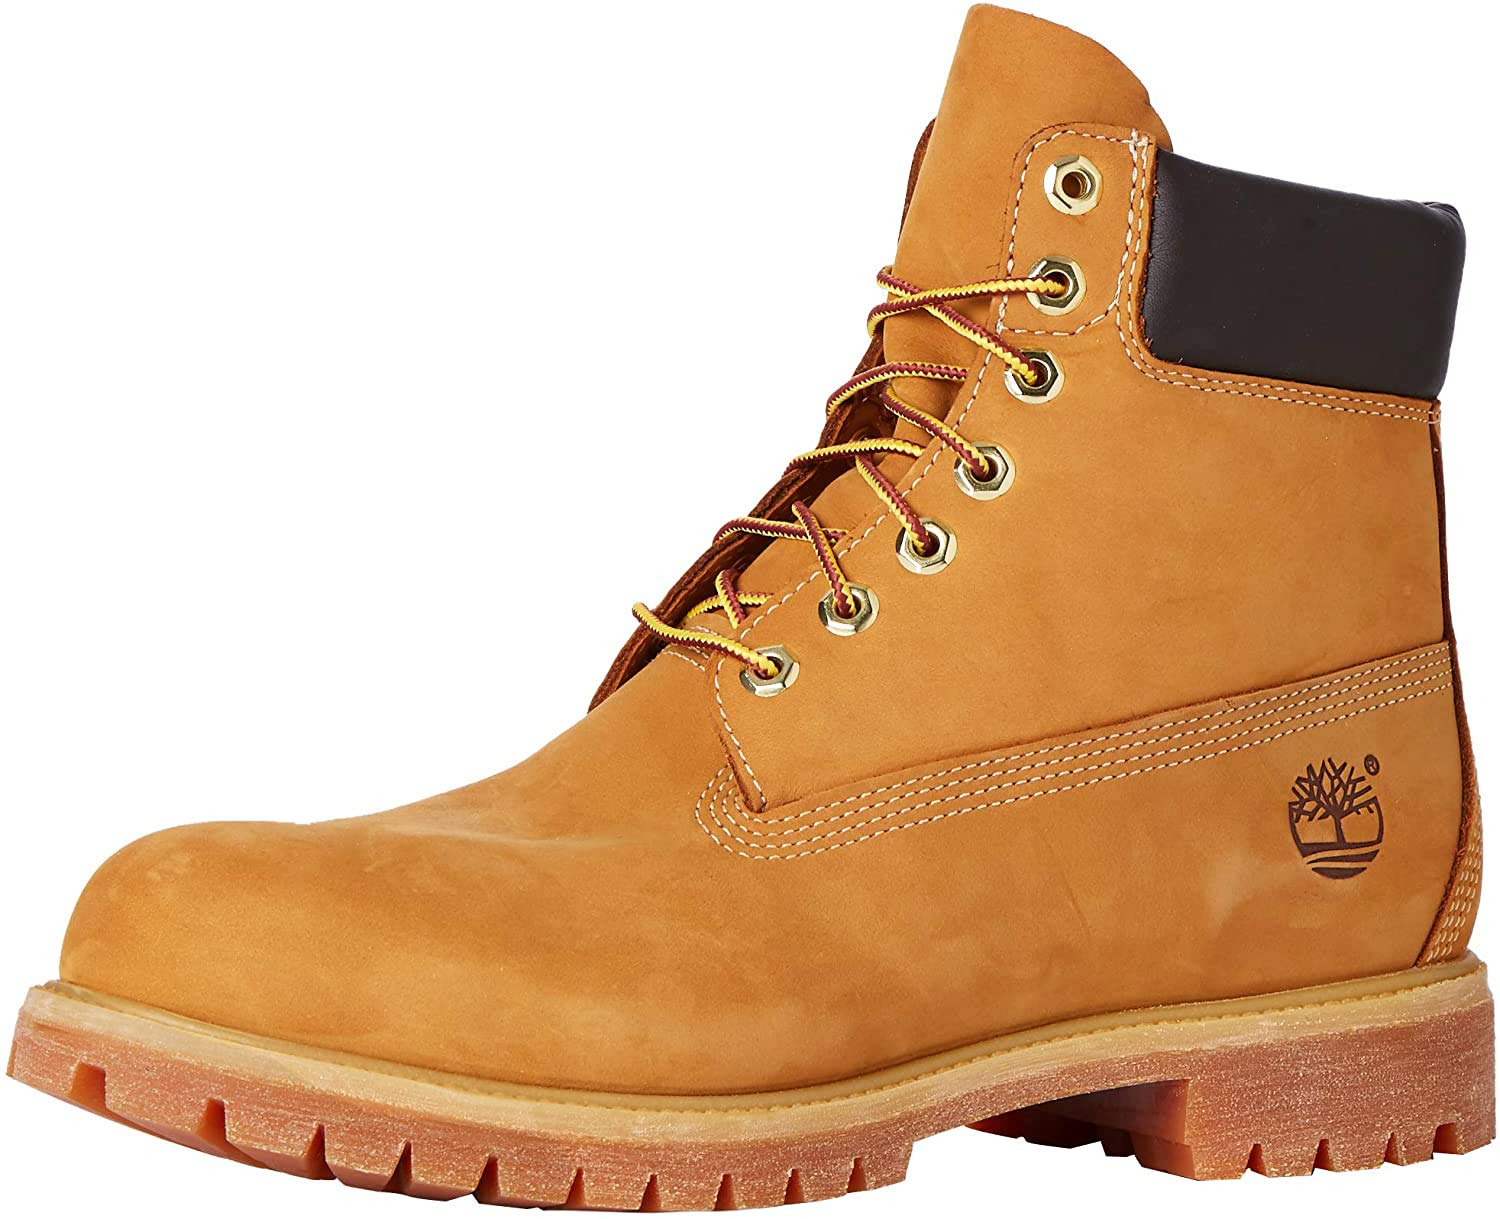 Consumir Siempre sombra Timberland Men's 6" Inch Waterproof Basic Ankle Boots Black & Wheat 10061 |  eBay